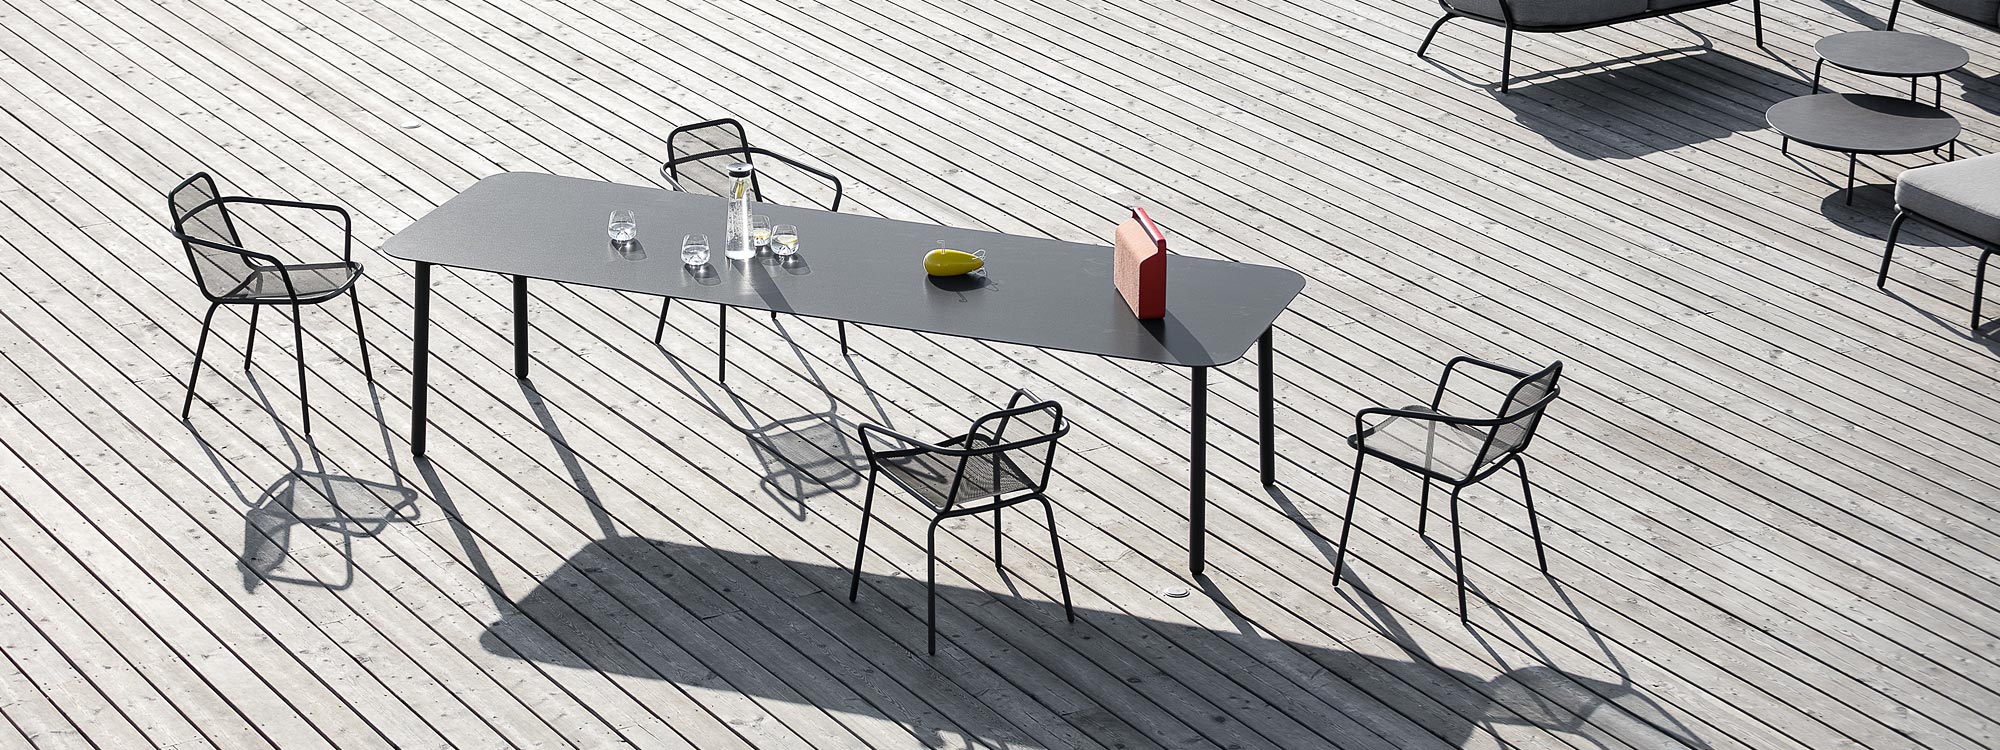 Starling contemporary outdoor dining furniture includes high quality garden tables & chairs by Todus stainless steel garden furniture company.